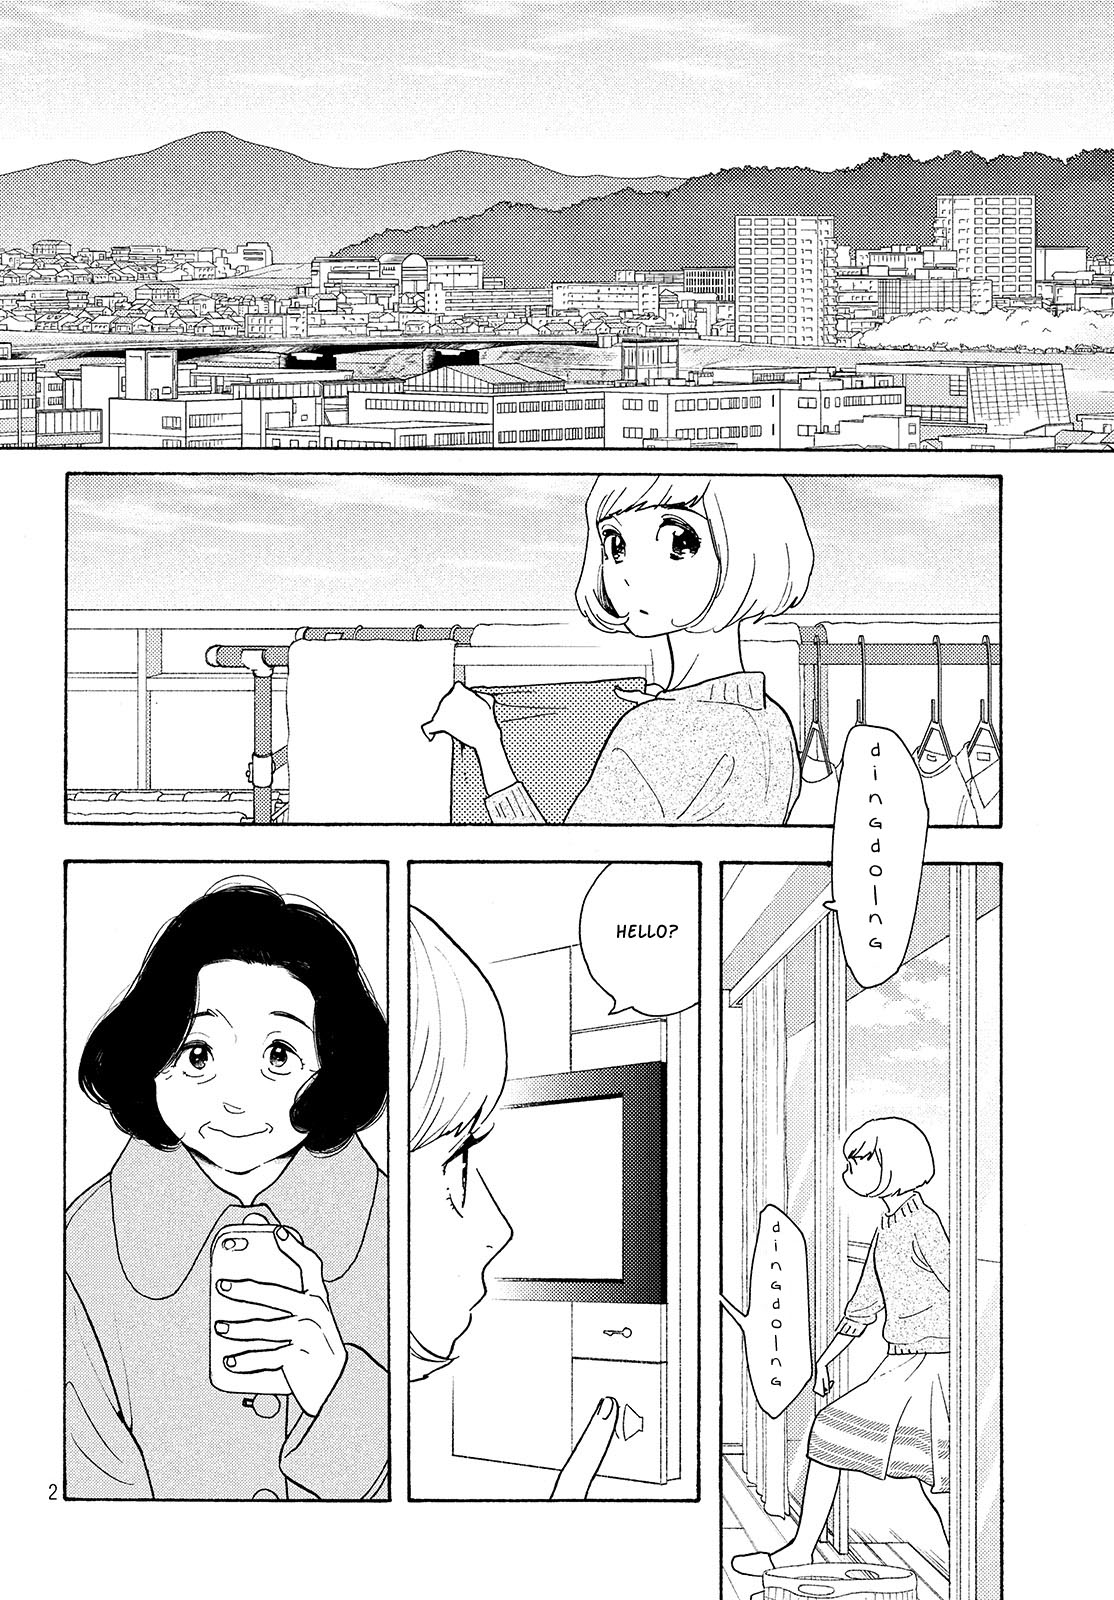 Even Though We're Adults - Page 1